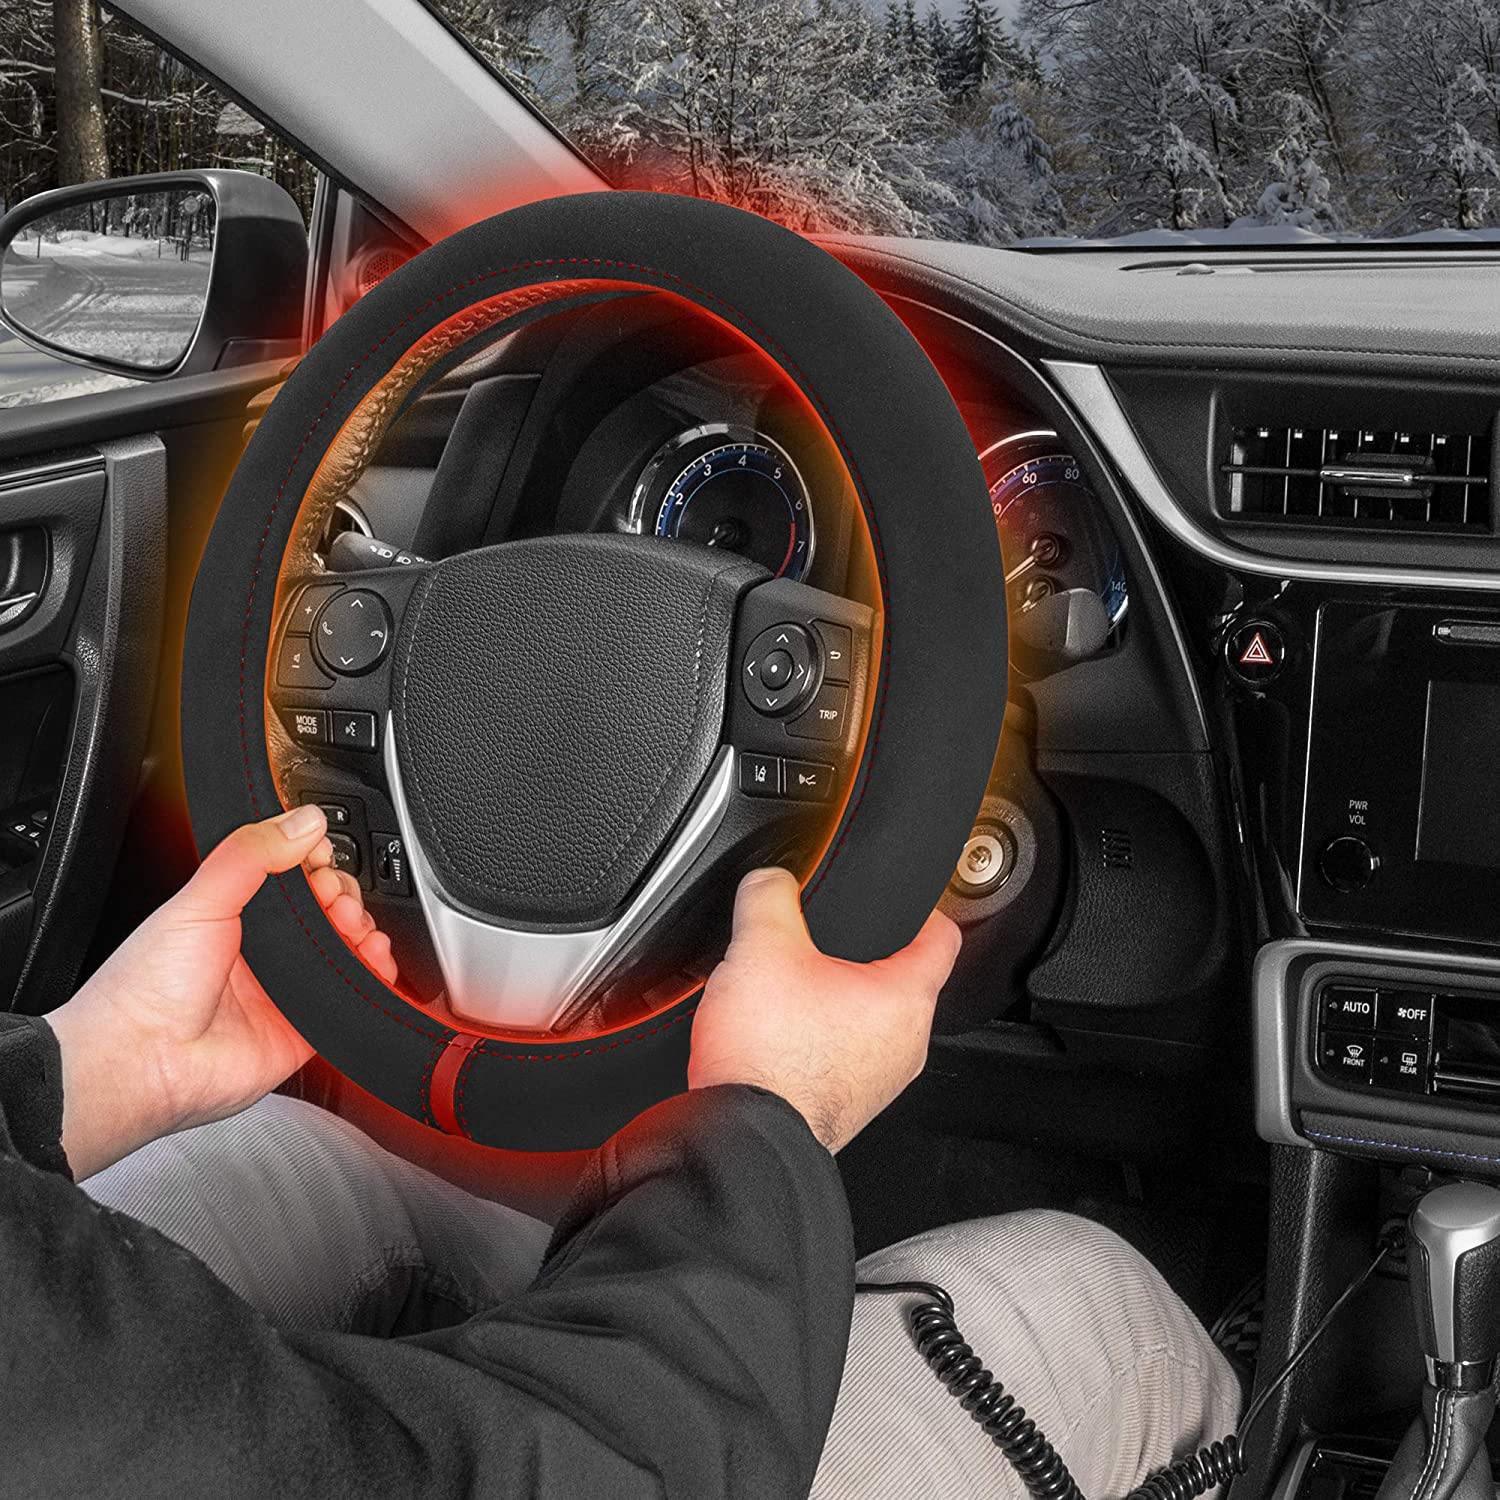 Warm Touch Heated Steering Wheel Cover Heats up Quickly - Universal Size 14.5-15.5" for Car Truck Van SUV - KinglyDay